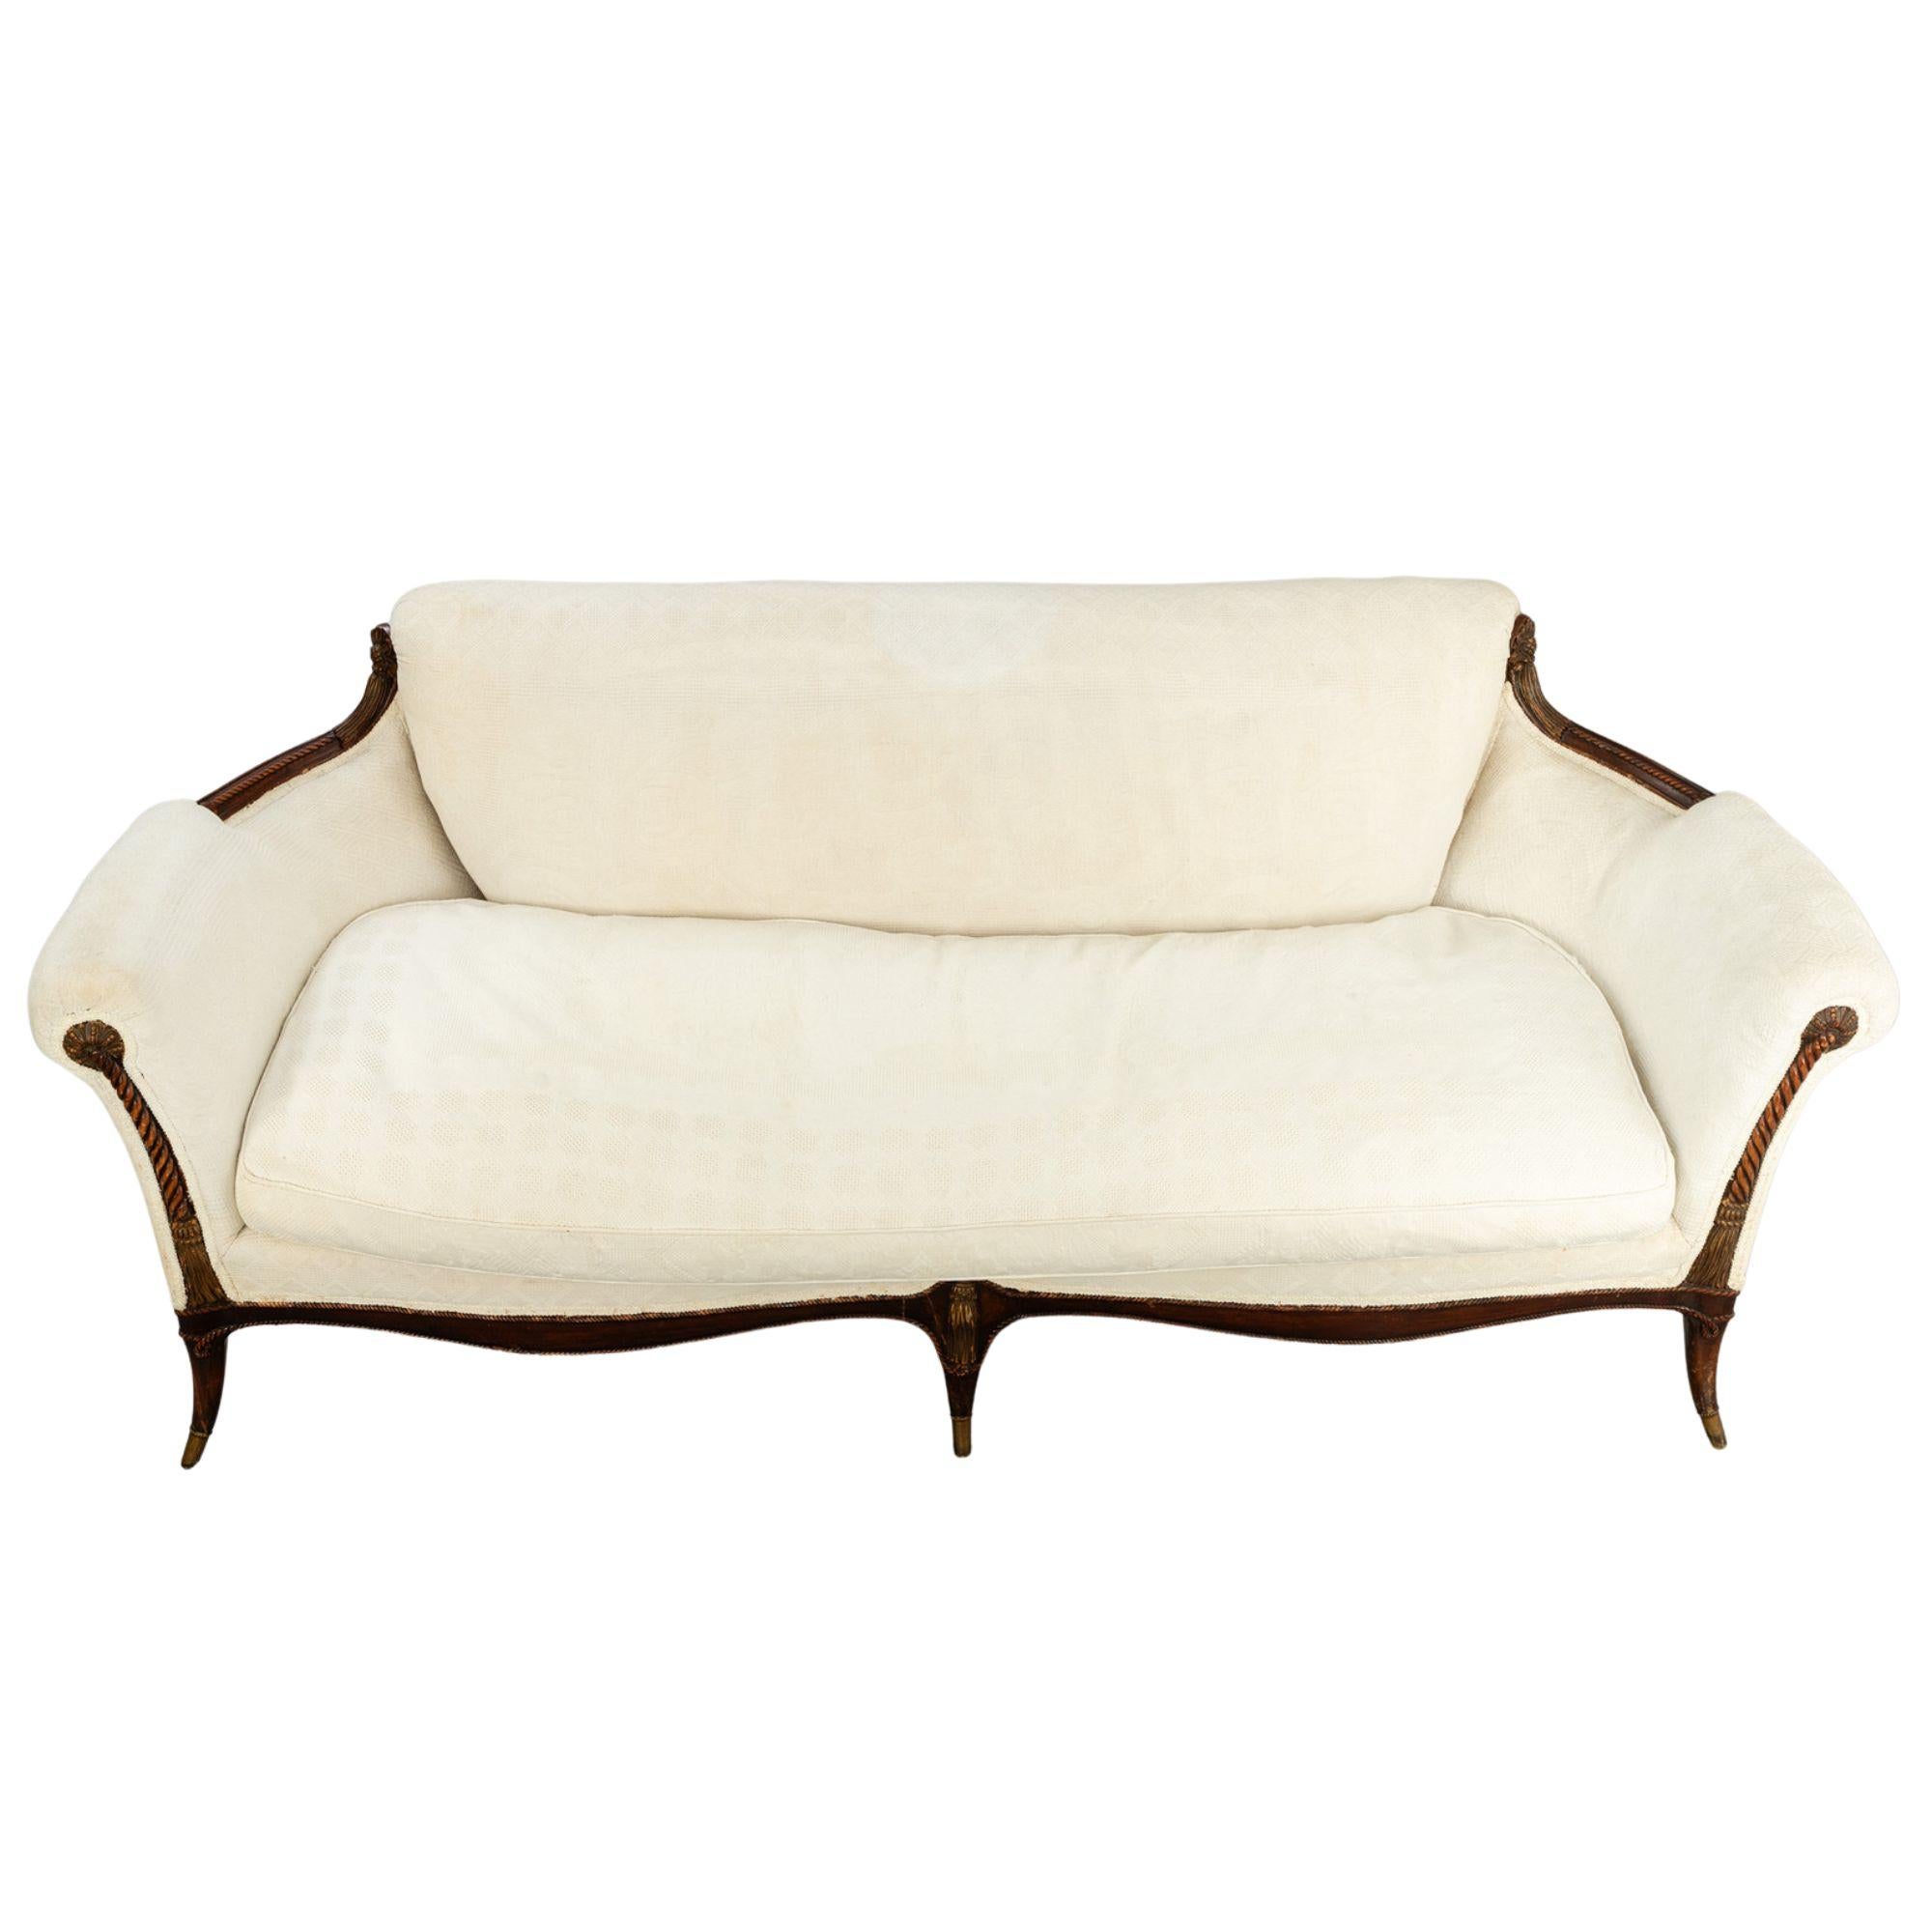 Rococo Revival Unique Sofa from the personal estate of Marilyn Monroe For Sale